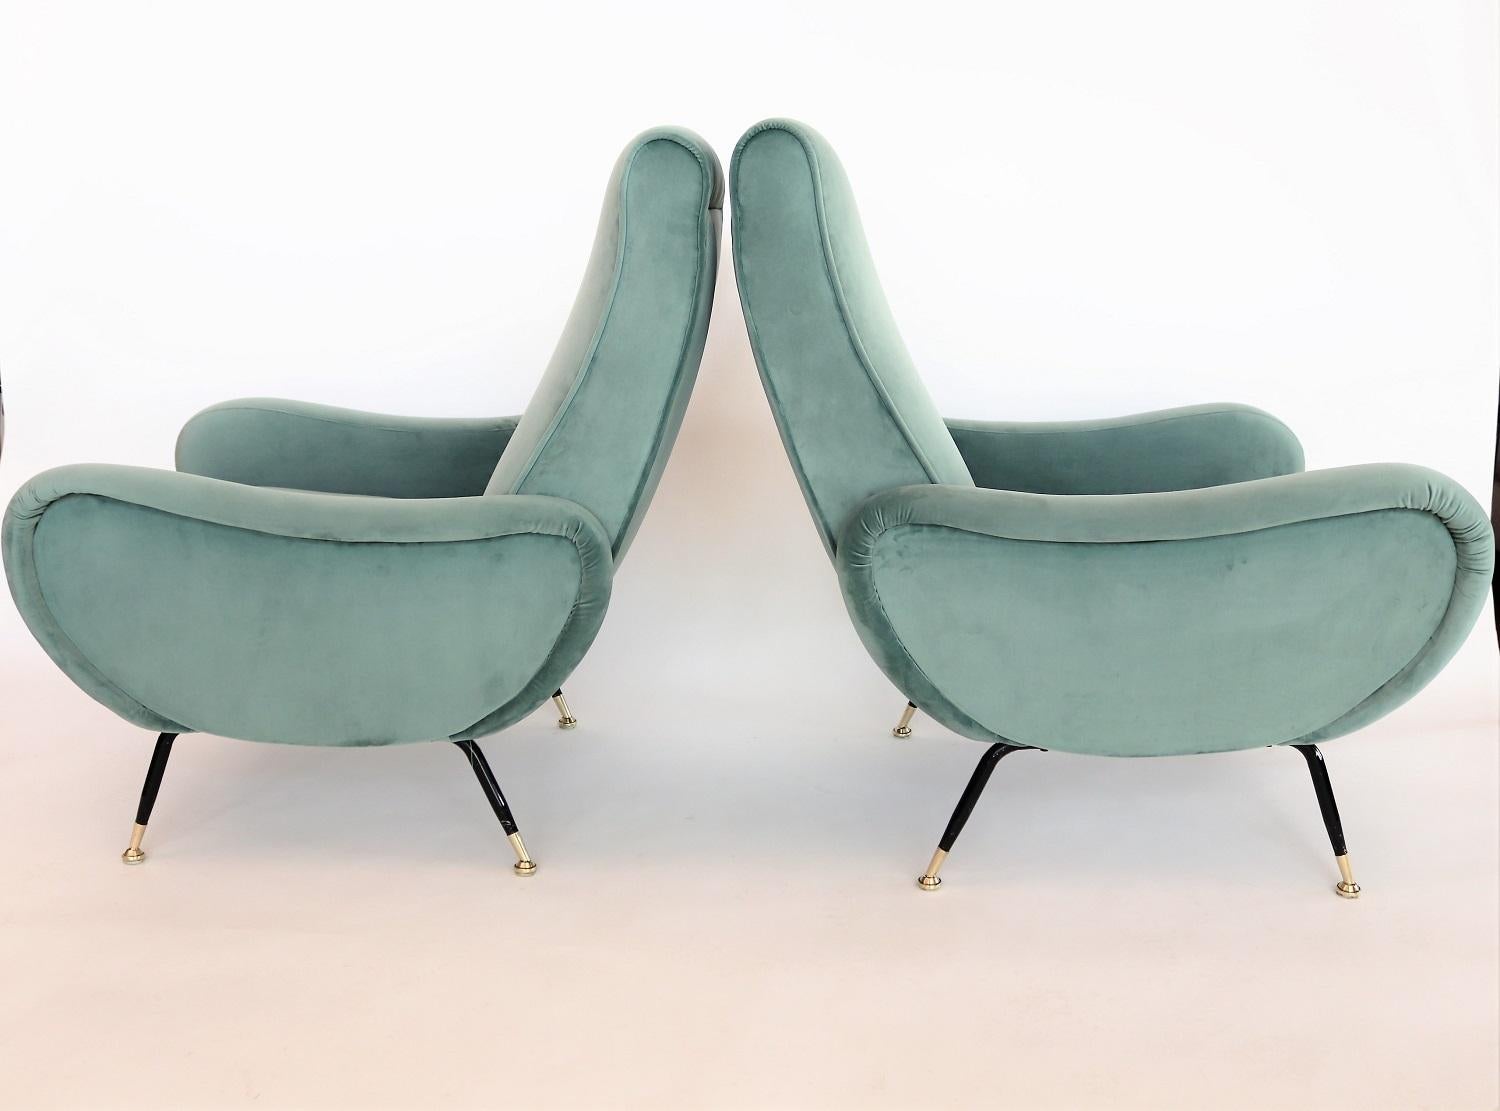 Elegant and beautiful pair of two Italian original midcentury armchairs or lounge chairs from the 1950s with black metal base and brass tips.
Completely restored internally with quality material and outside reupholstered with soft light mint green